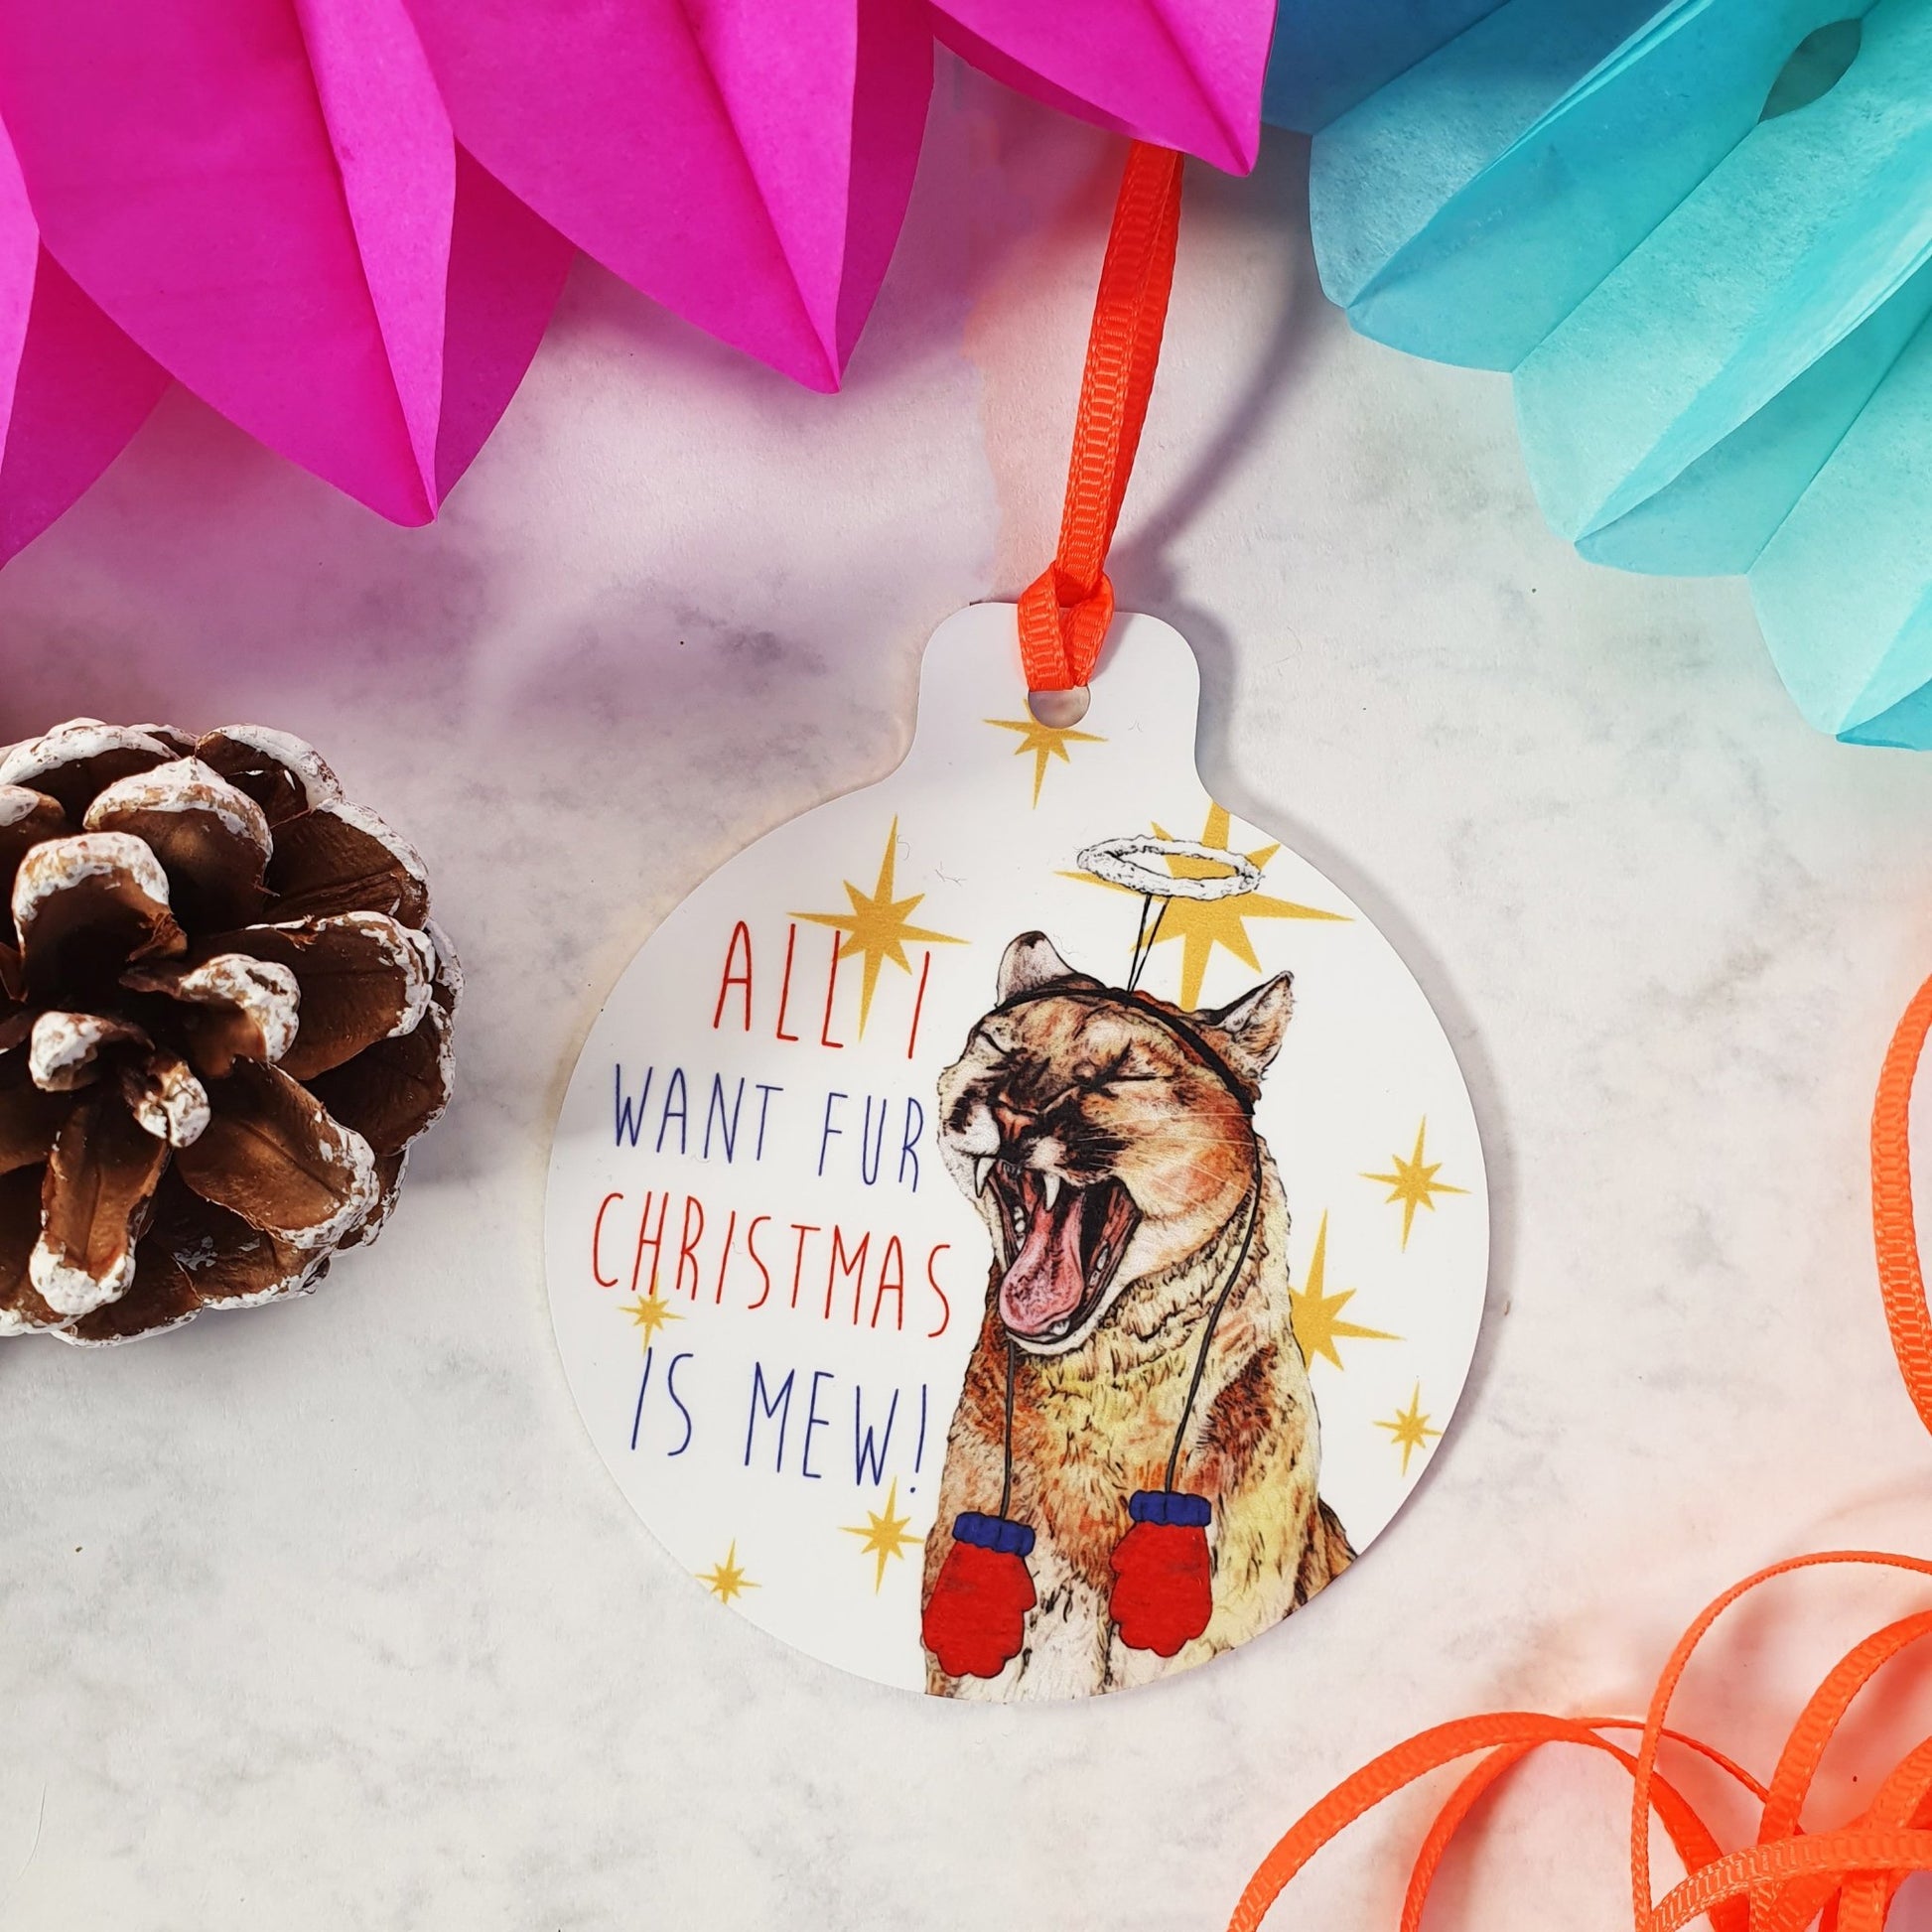 Cougar 'All I Want Fur Christmas' Christmas Tree Decoration - Fawn and Thistle